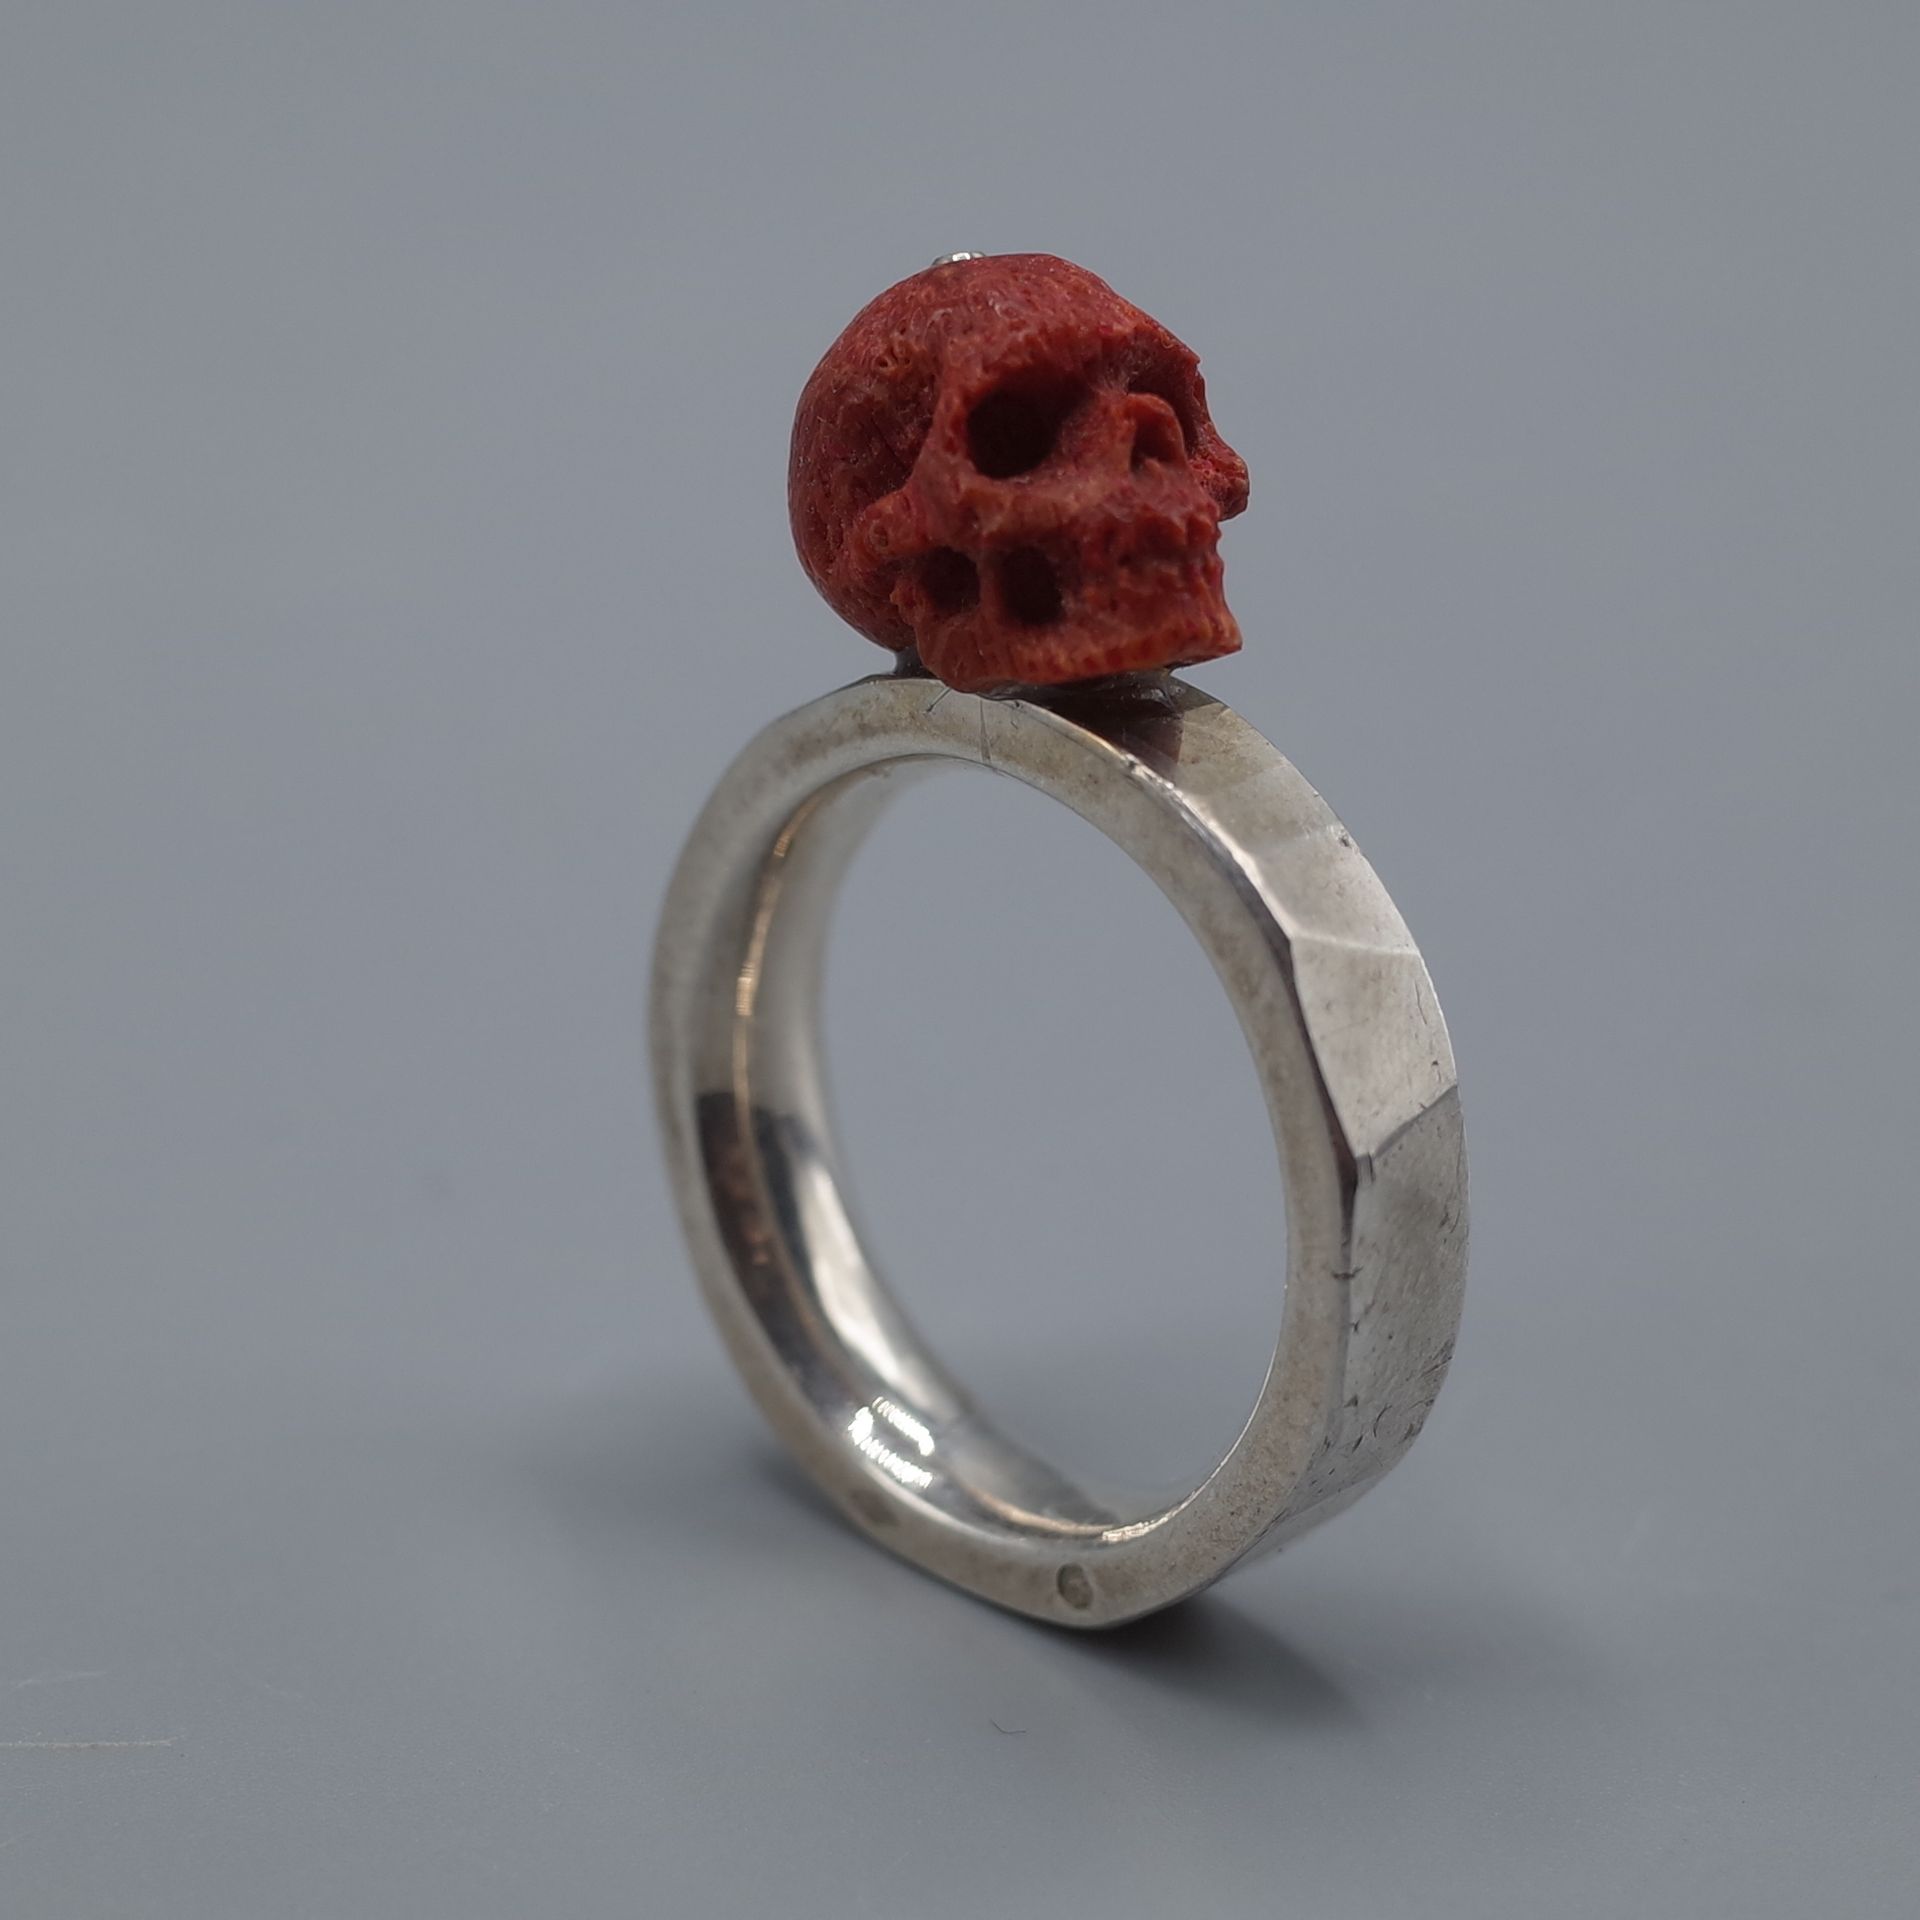 Null Silver ring set with a skull and crossbones in cut red coral

Gross weight:&hellip;